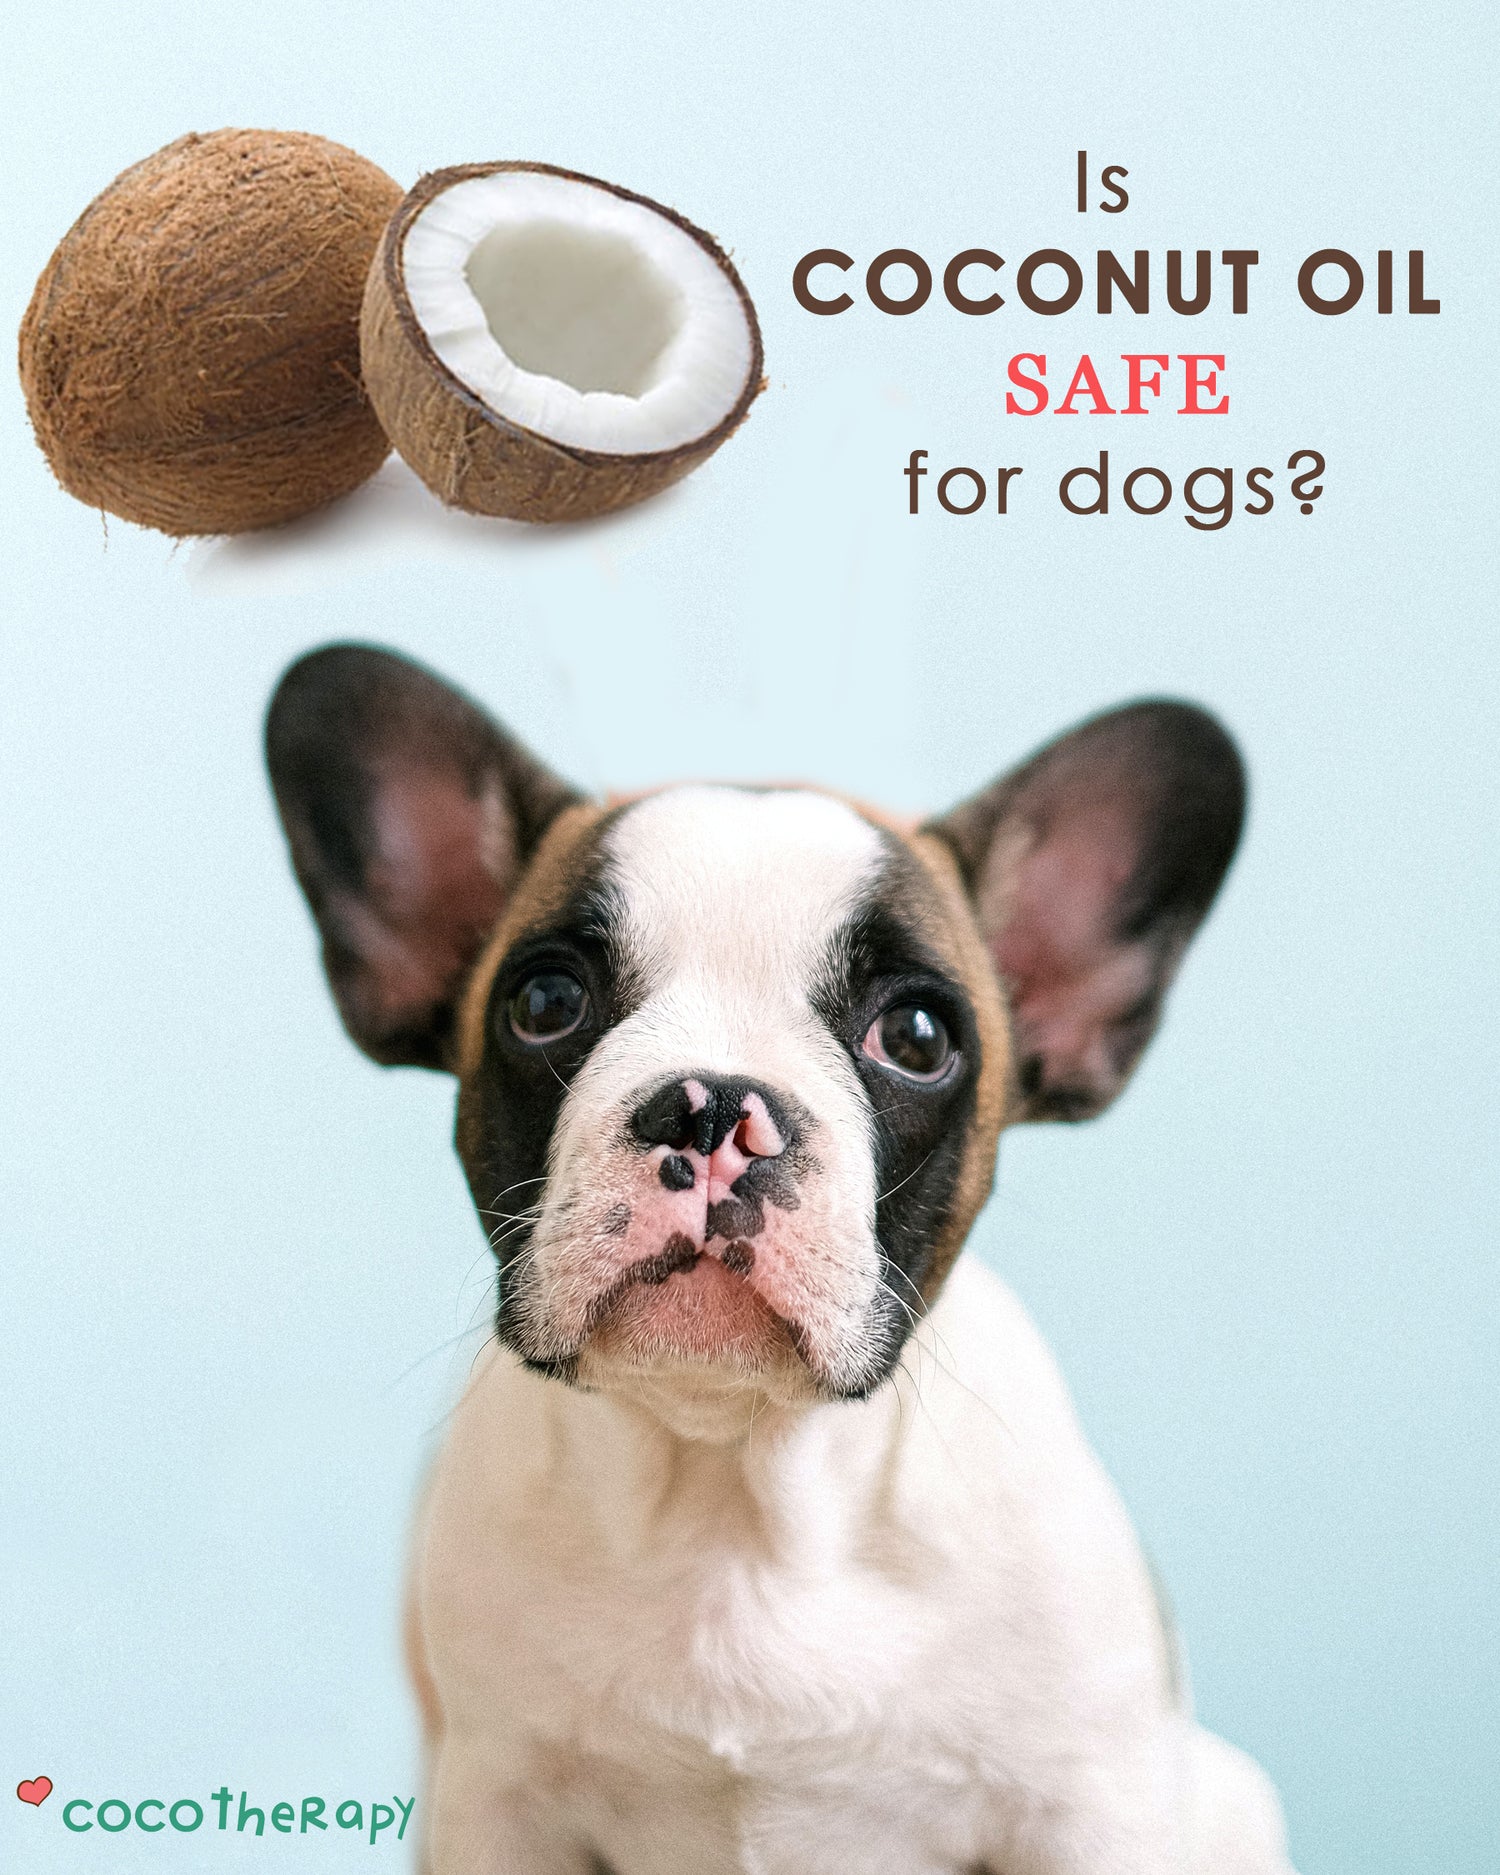 Is Coconut Oil Safe for Dogs? Does Research Say Stay Away?